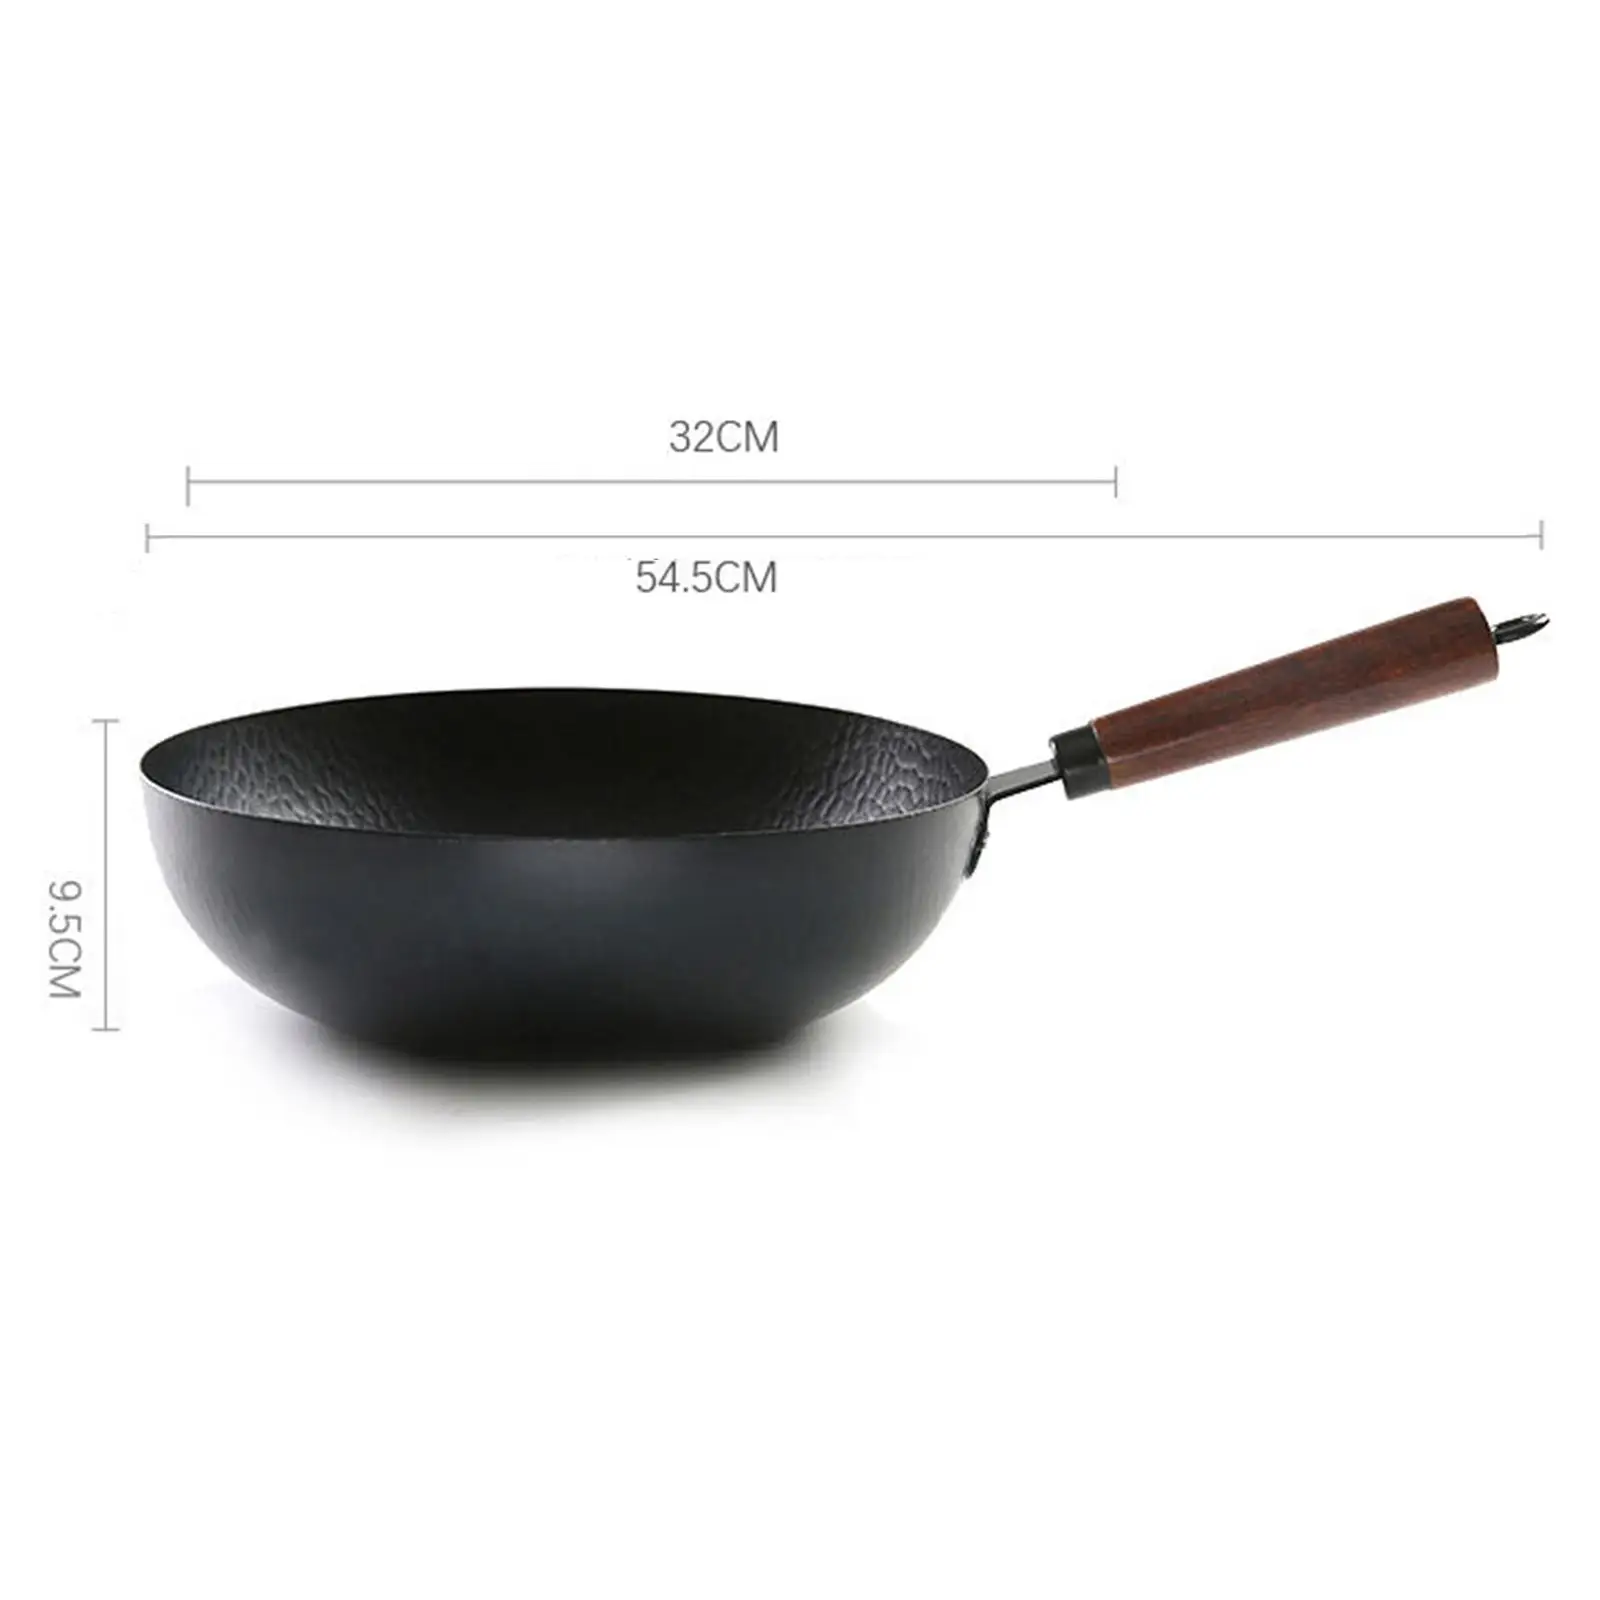 Wok Pan Household Non Coating Long Handle Cast Iron Grilling Wok for Cooking Electric, Gas, Halogen, All Stoves Induction 12inch